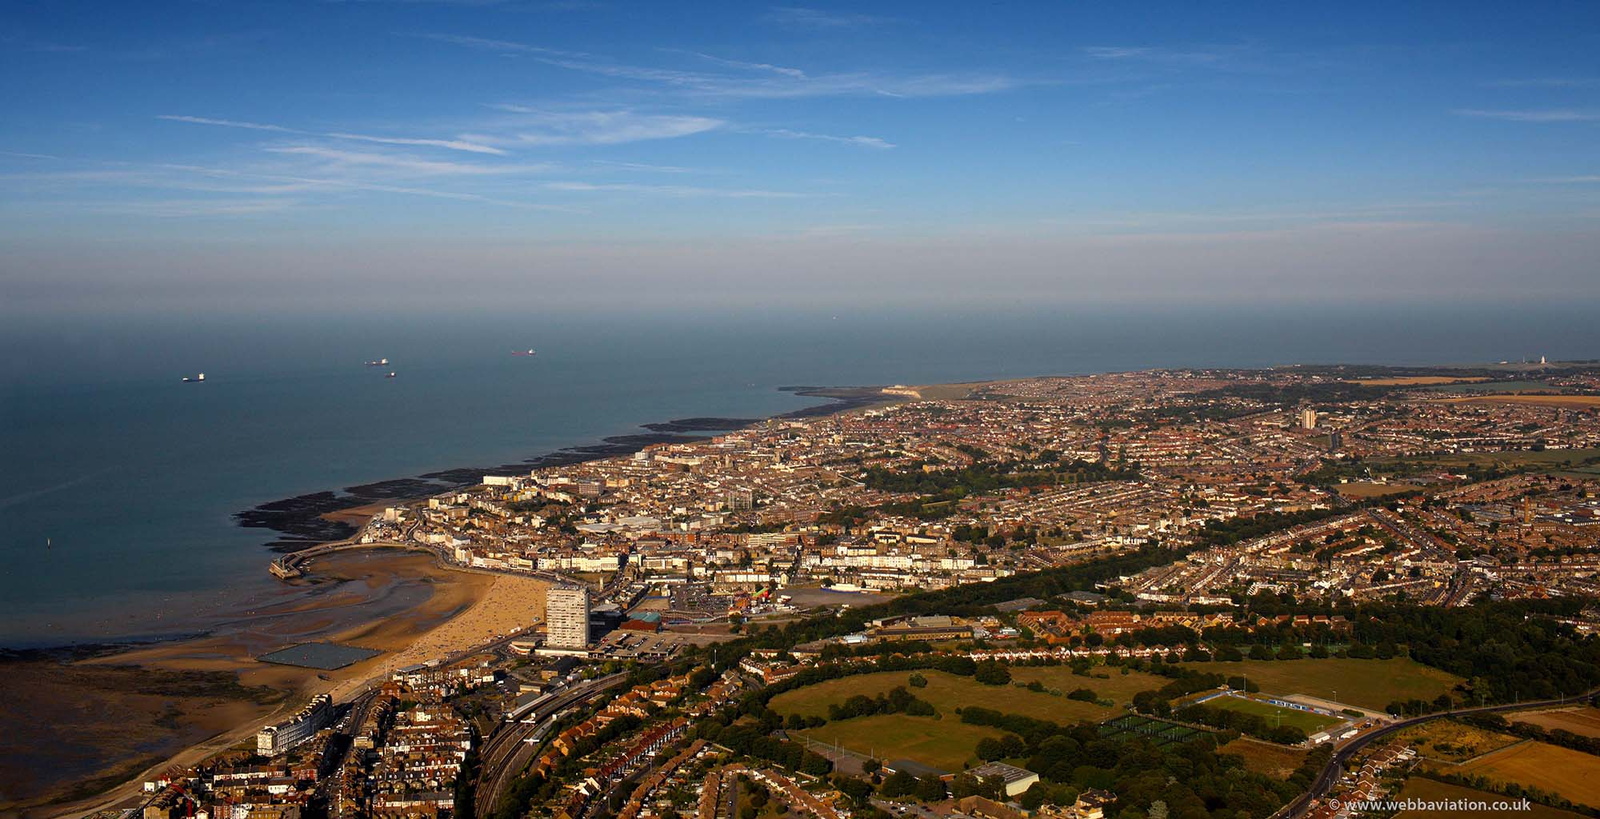 Margate from the air